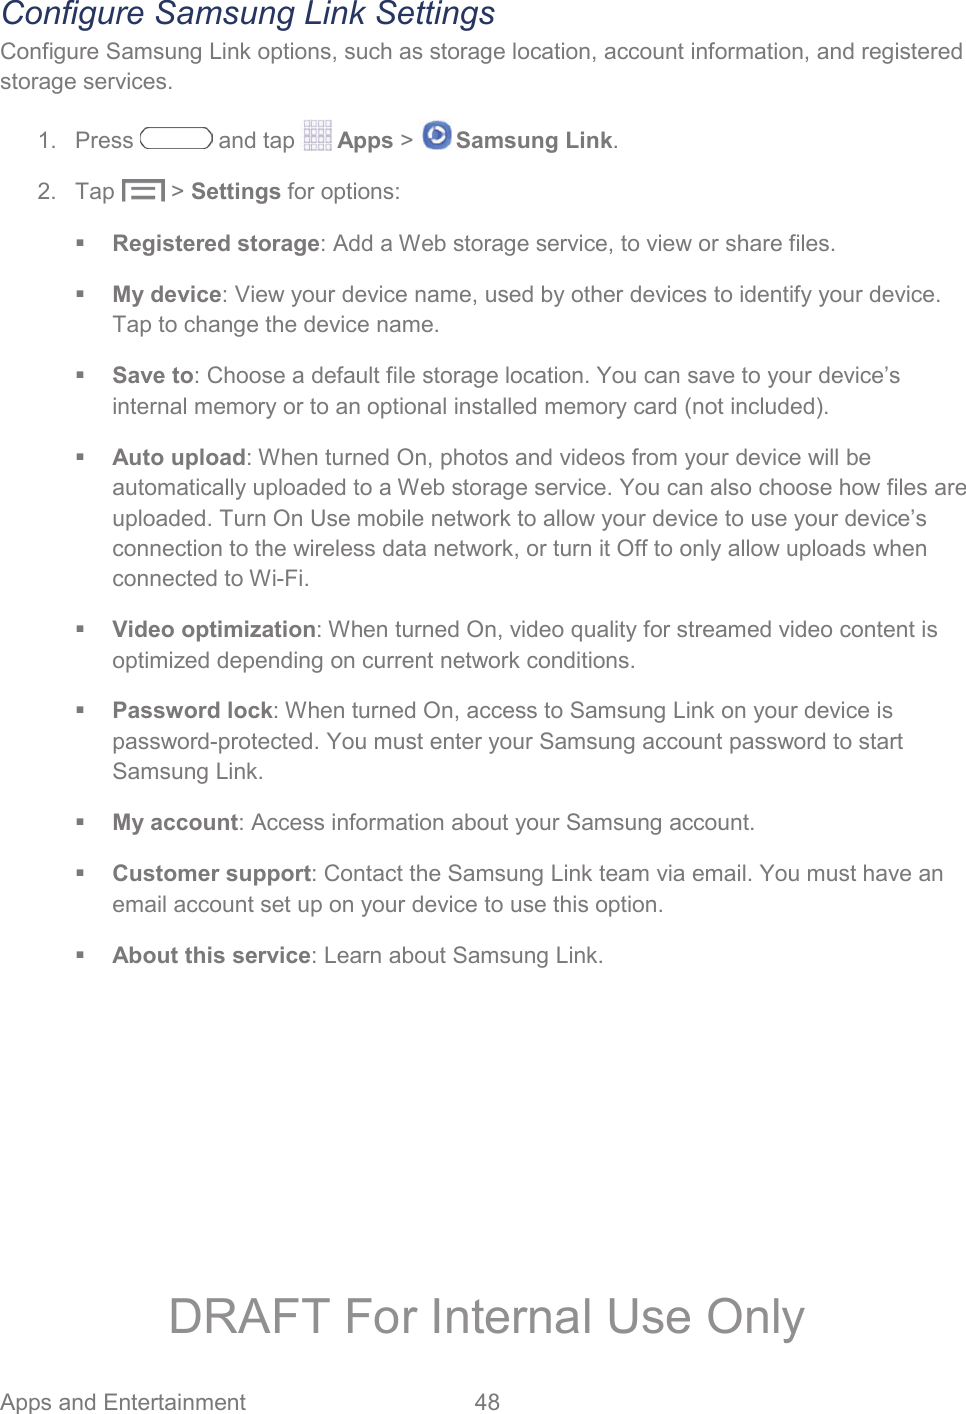 Apps and Entertainment  48   Configure Samsung Link Settings Configure Samsung Link options, such as storage location, account information, and registered storage services. 1. Press   and tap   Apps &gt;   Samsung Link. 2. Tap   &gt; Settings for options:  Registered storage: Add a Web storage service, to view or share files.  My device: View your device name, used by other devices to identify your device. Tap to change the device name.  Save to: Choose a default file storage location. You can save to your device’s internal memory or to an optional installed memory card (not included).  Auto upload: When turned On, photos and videos from your device will be automatically uploaded to a Web storage service. You can also choose how files are uploaded. Turn On Use mobile network to allow your device to use your device’s connection to the wireless data network, or turn it Off to only allow uploads when connected to Wi-Fi.  Video optimization: When turned On, video quality for streamed video content is optimized depending on current network conditions.  Password lock: When turned On, access to Samsung Link on your device is password-protected. You must enter your Samsung account password to start Samsung Link.  My account: Access information about your Samsung account.  Customer support: Contact the Samsung Link team via email. You must have an email account set up on your device to use this option.  About this service: Learn about Samsung Link. DRAFT For Internal Use Only